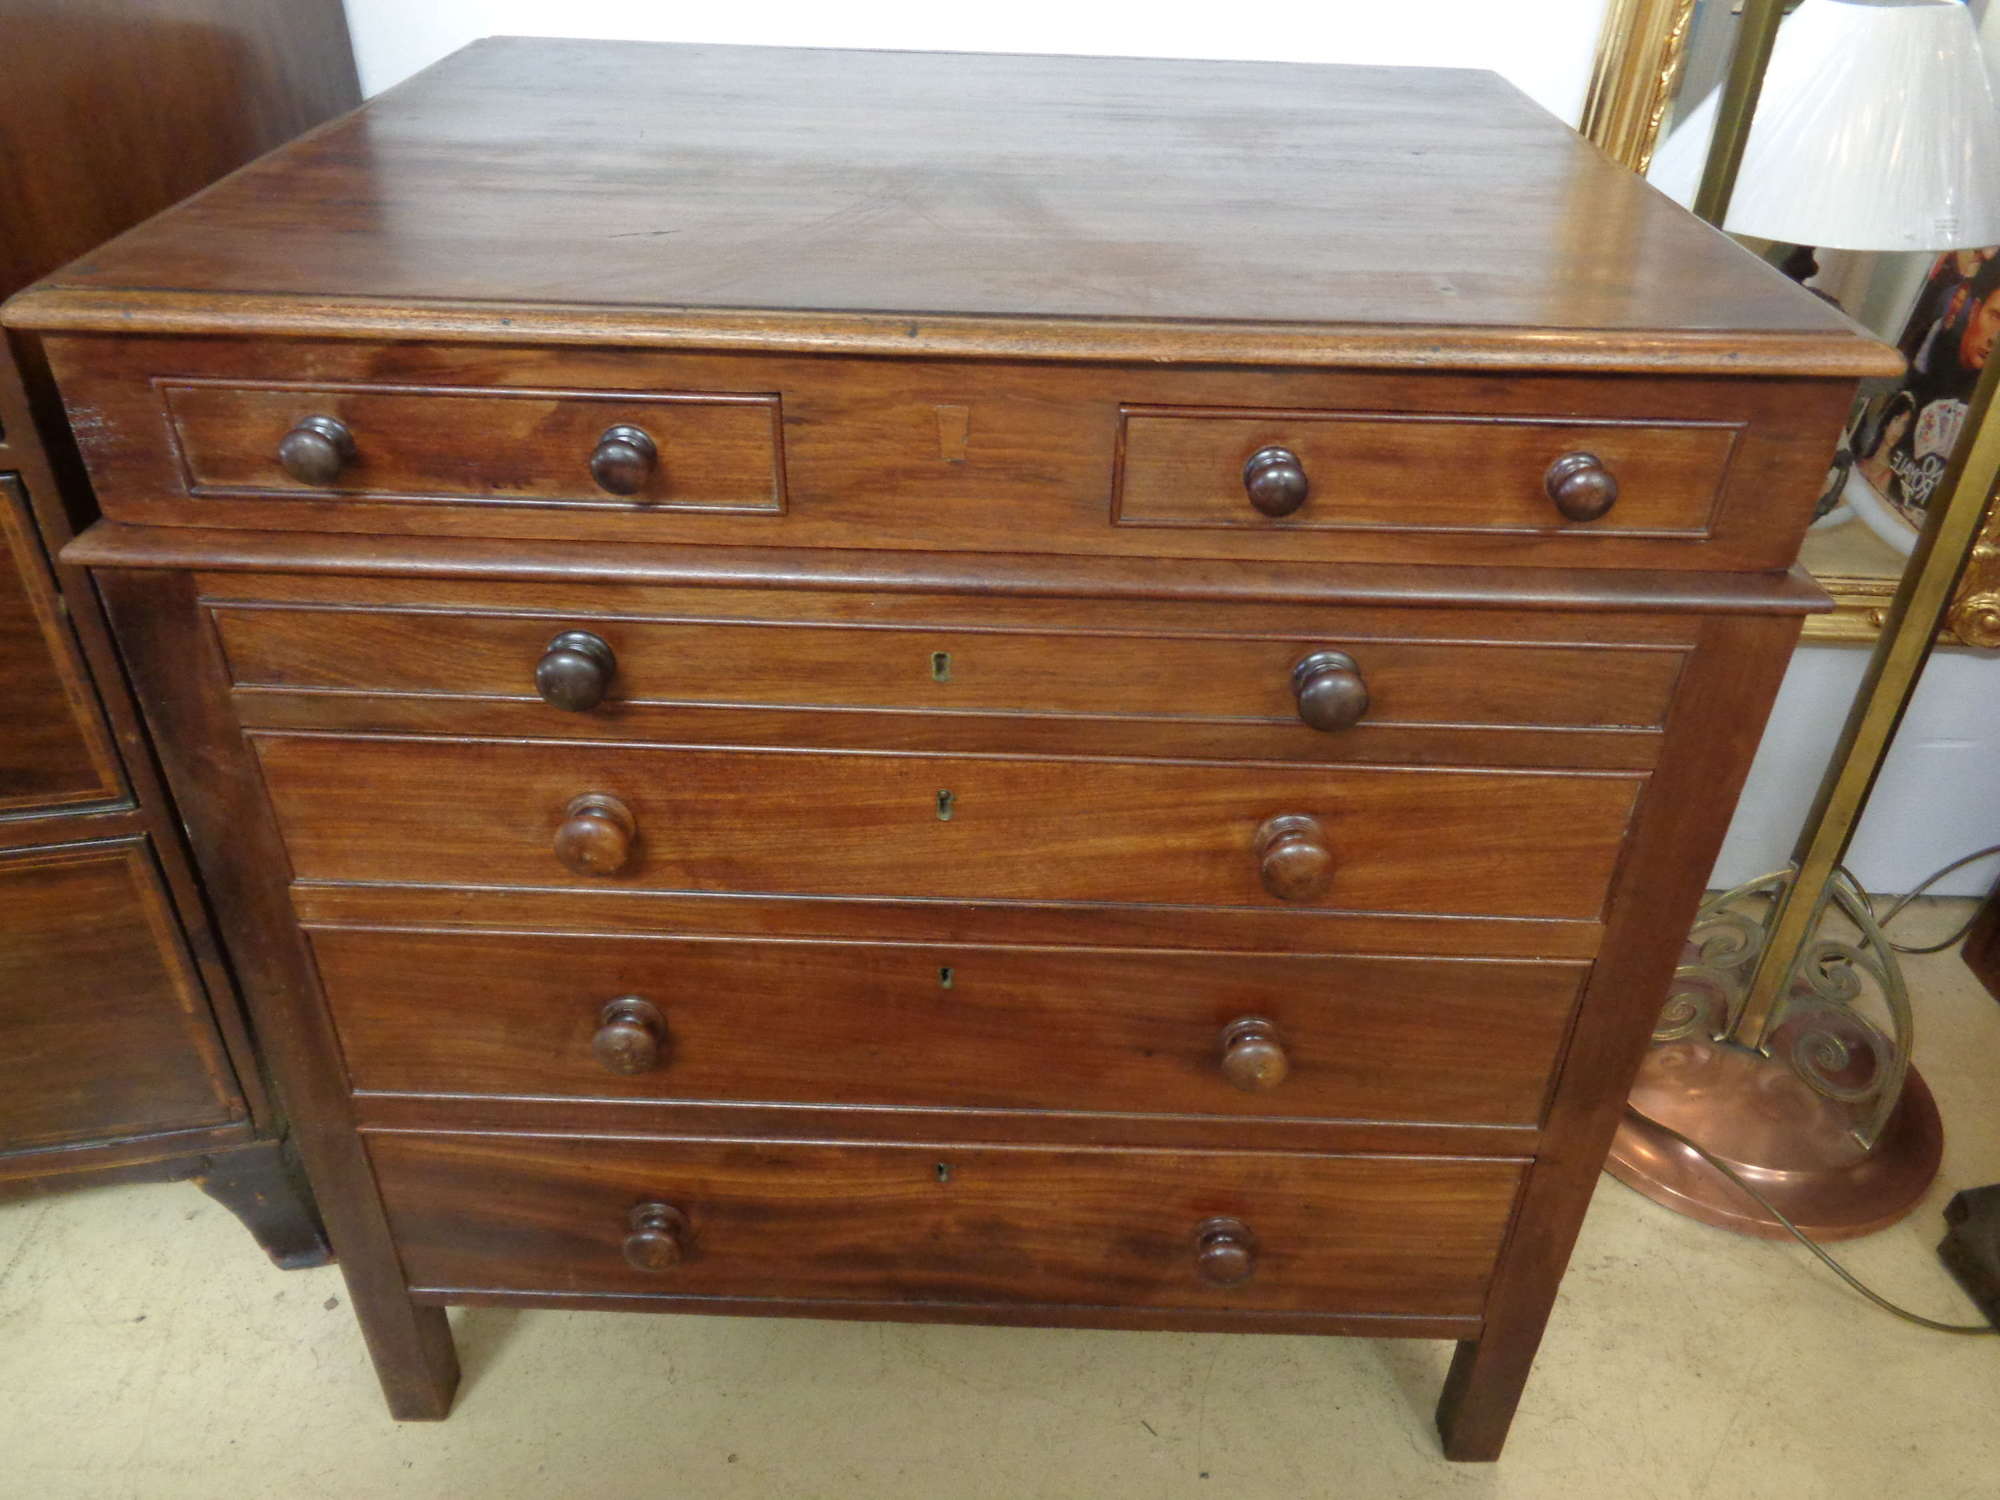 Antique Chest of Drawers 3 Full Drawers & 2 Small Drawers